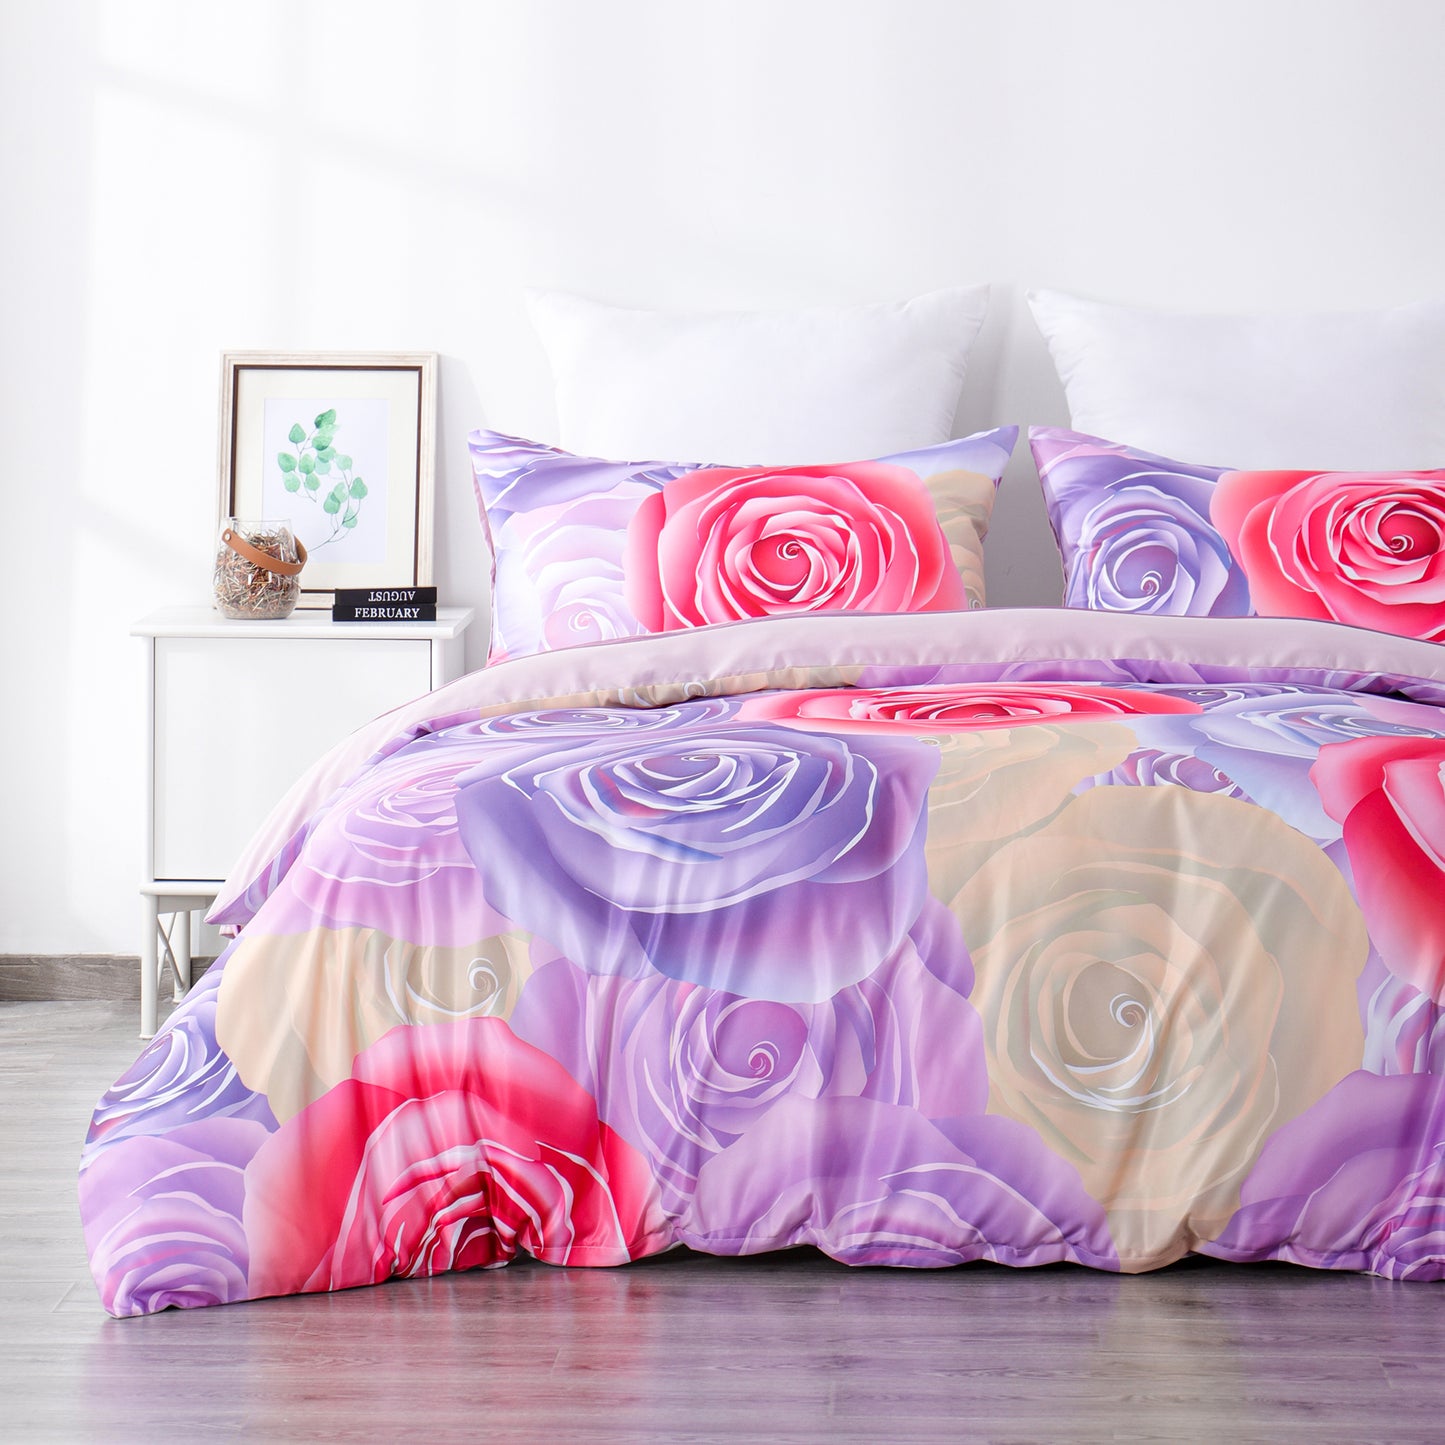 Duvet cover luxury-floral pink